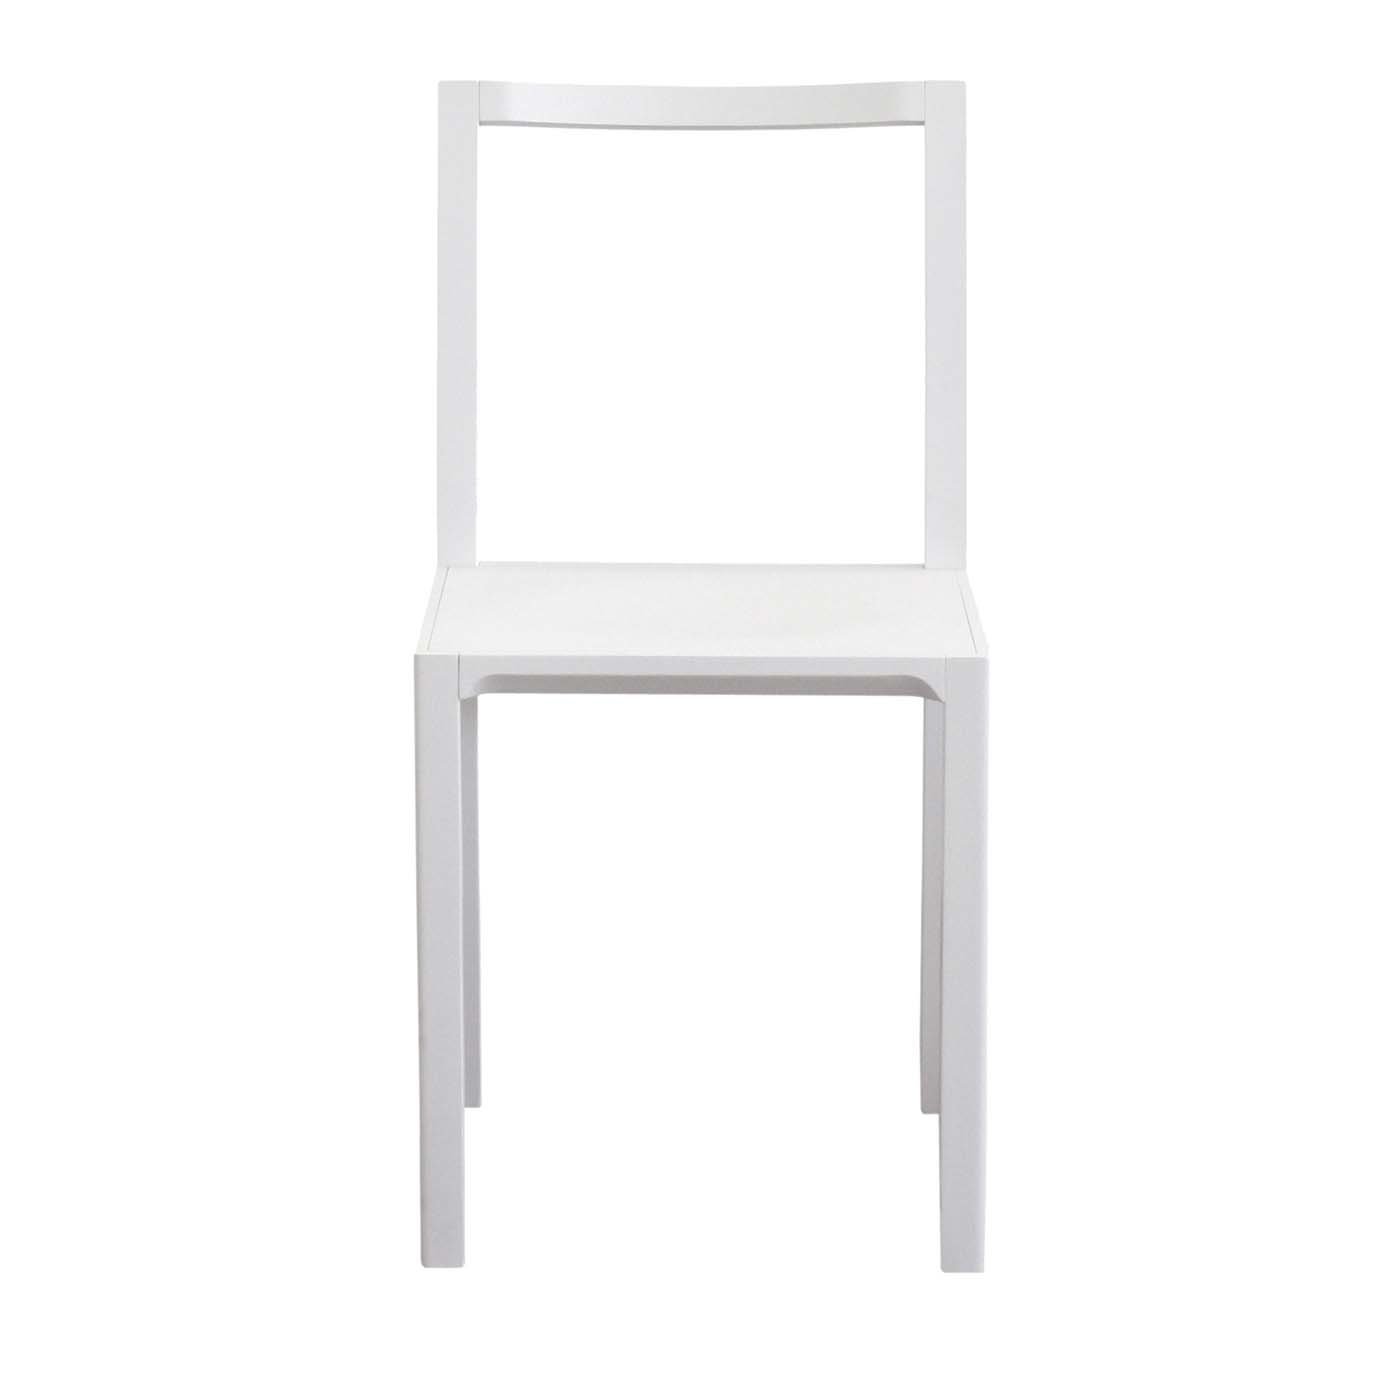 Framework Set of 2 White Chairs by Steffen Kehrle - Main view